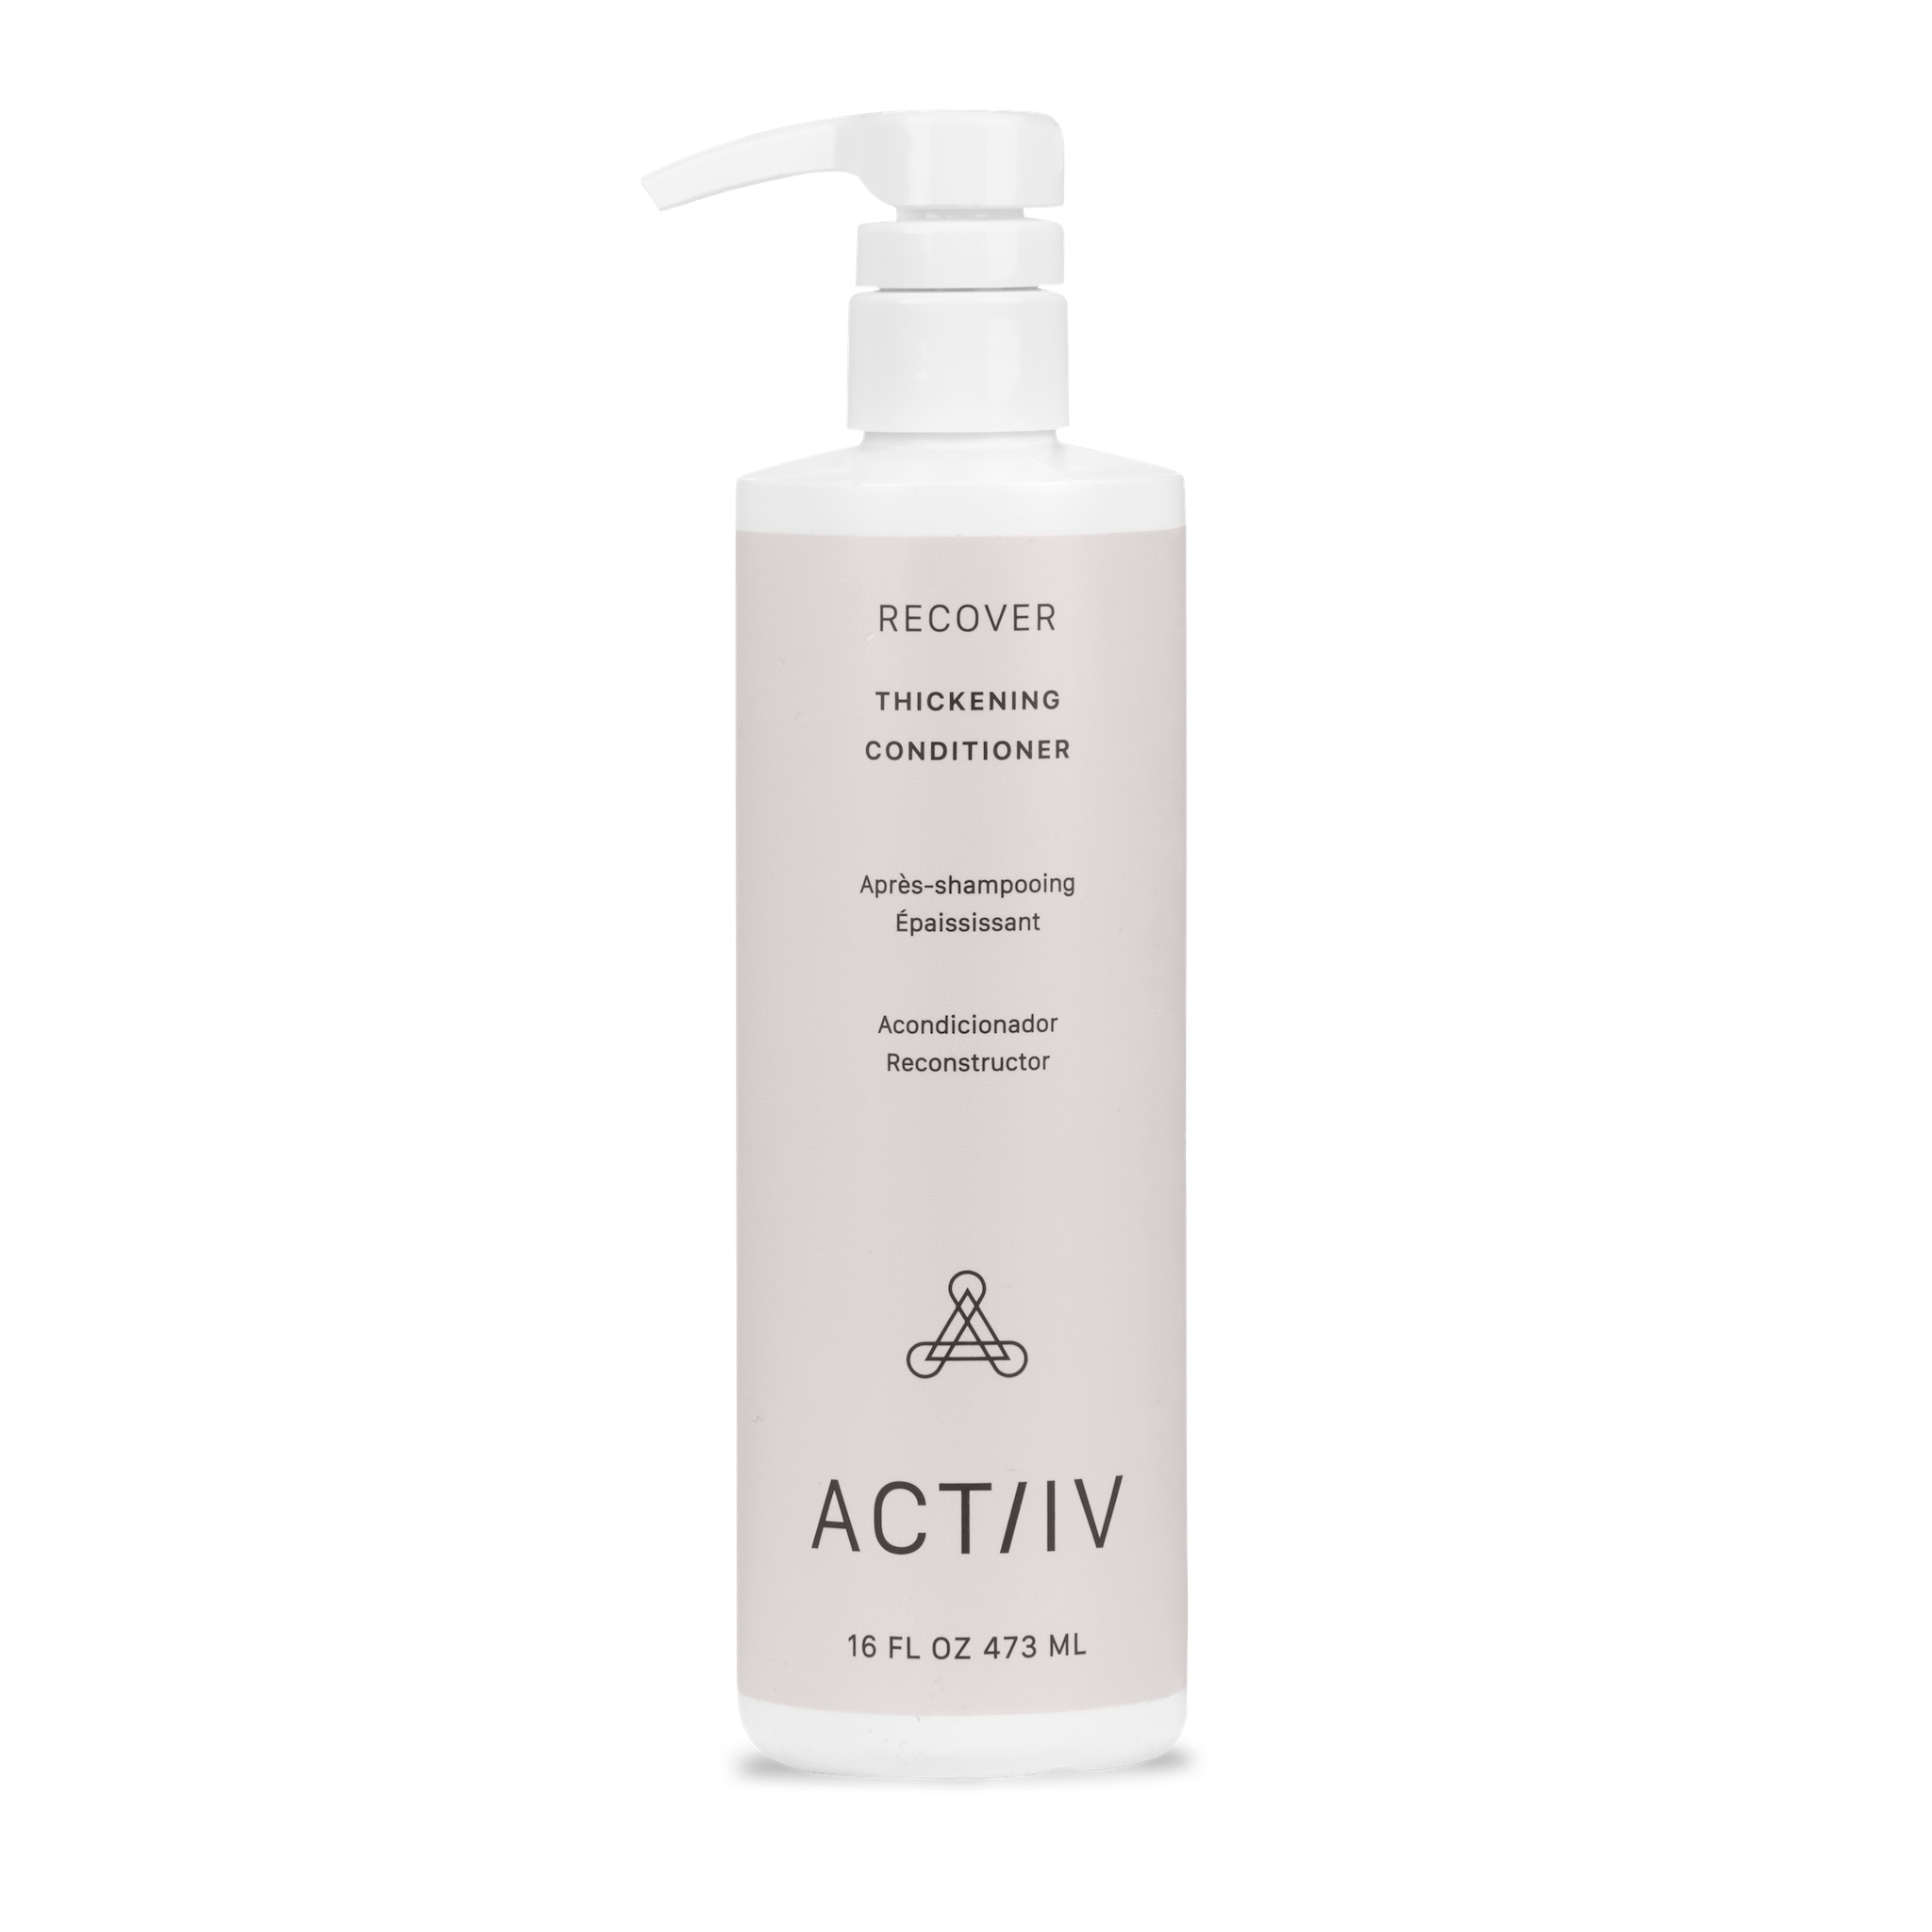 Actiiv Recover Thickening Conditioner 16oz Bottle